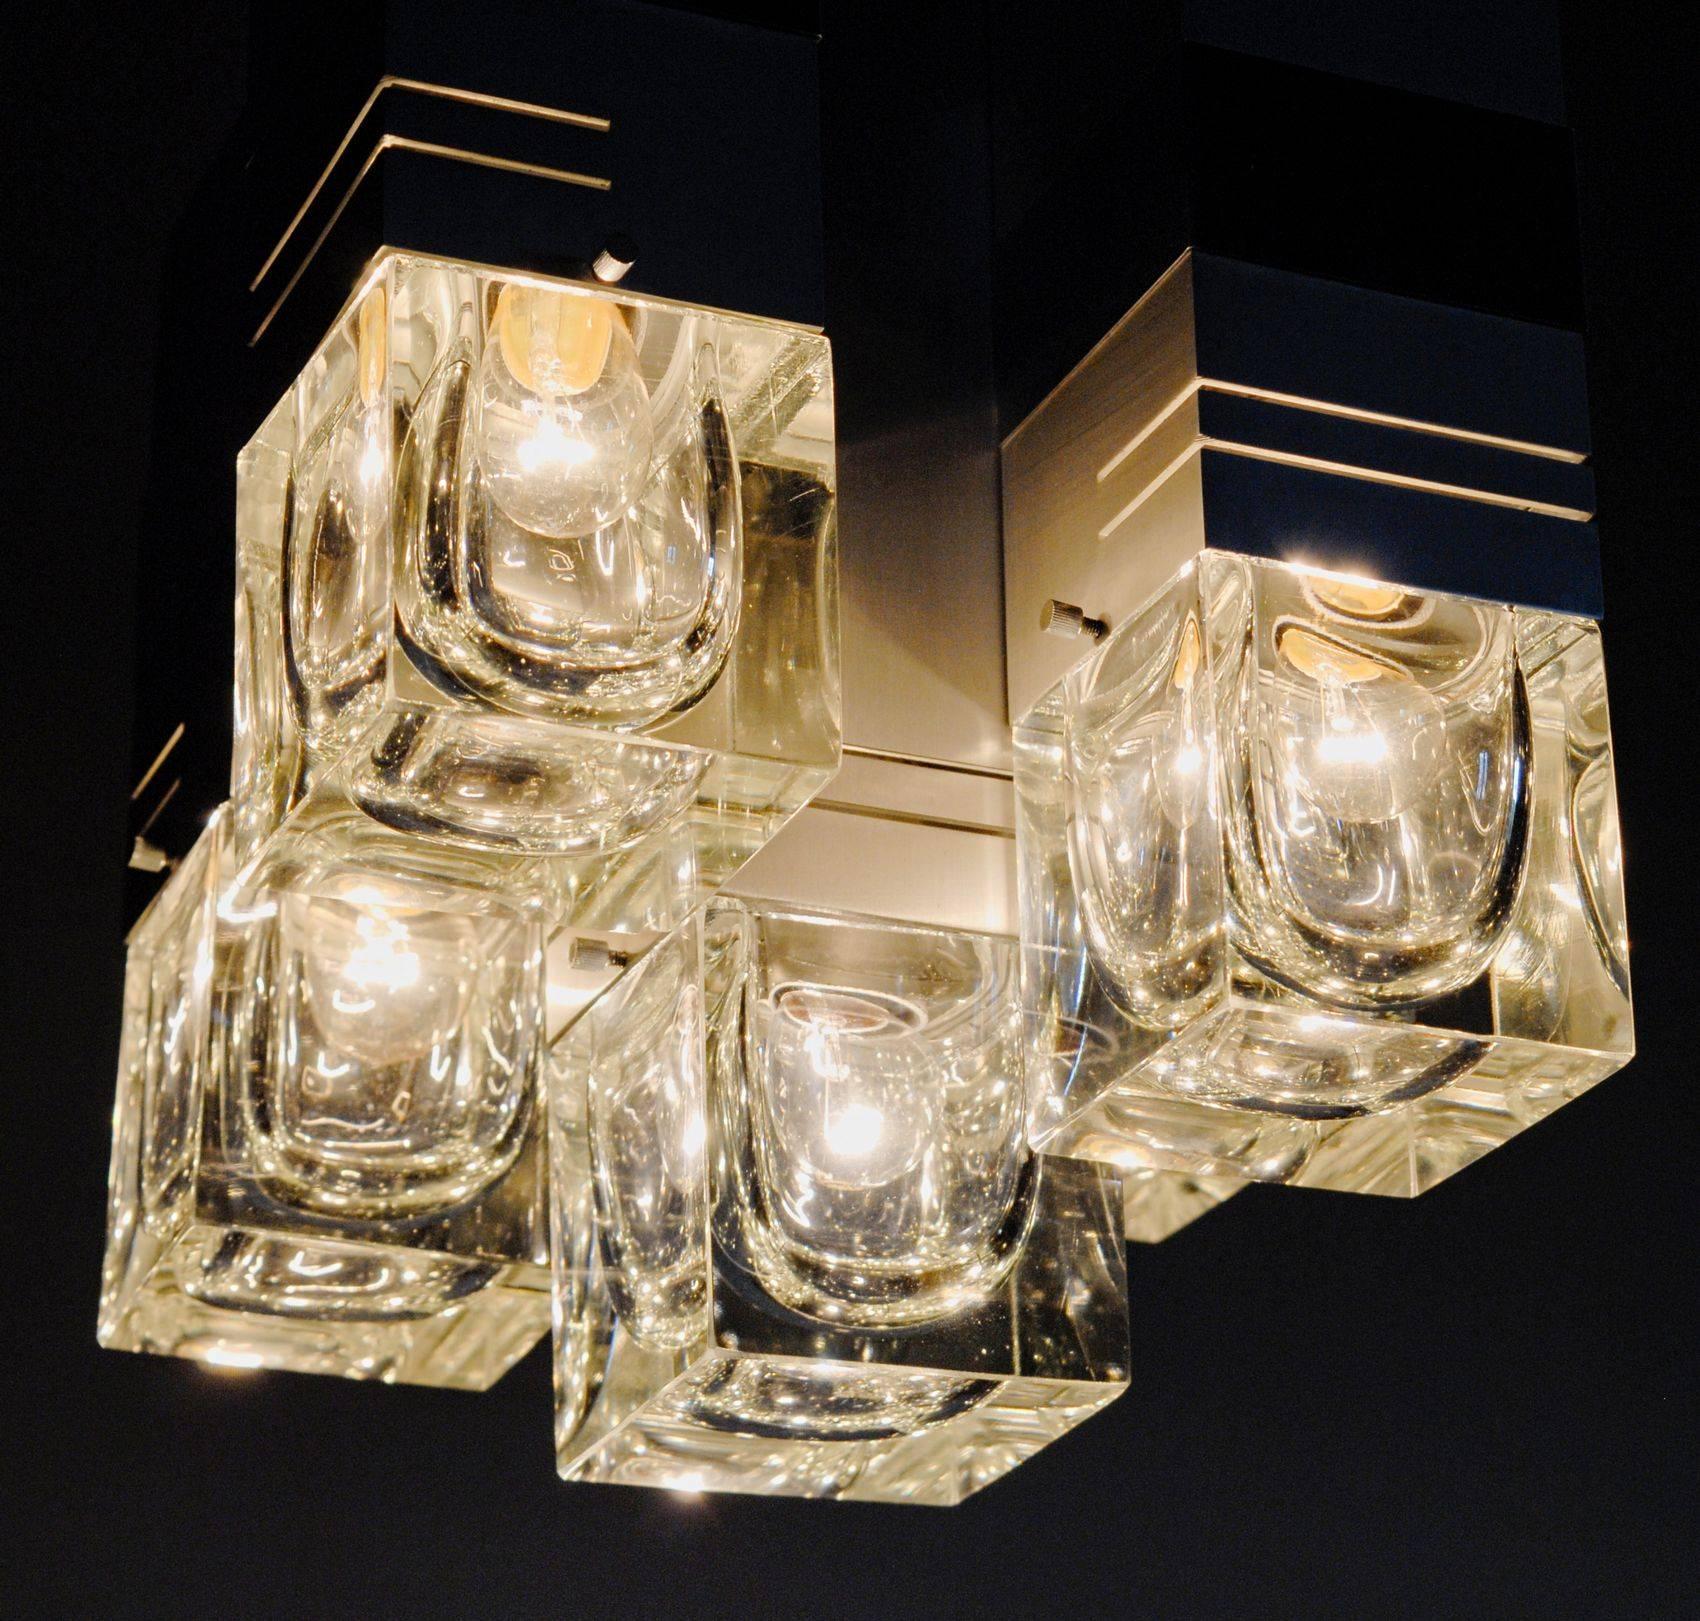 Brushed Sciolari and Fidenza Vetraria Cubosfera solid glass Chandelier Five Lights 1960s